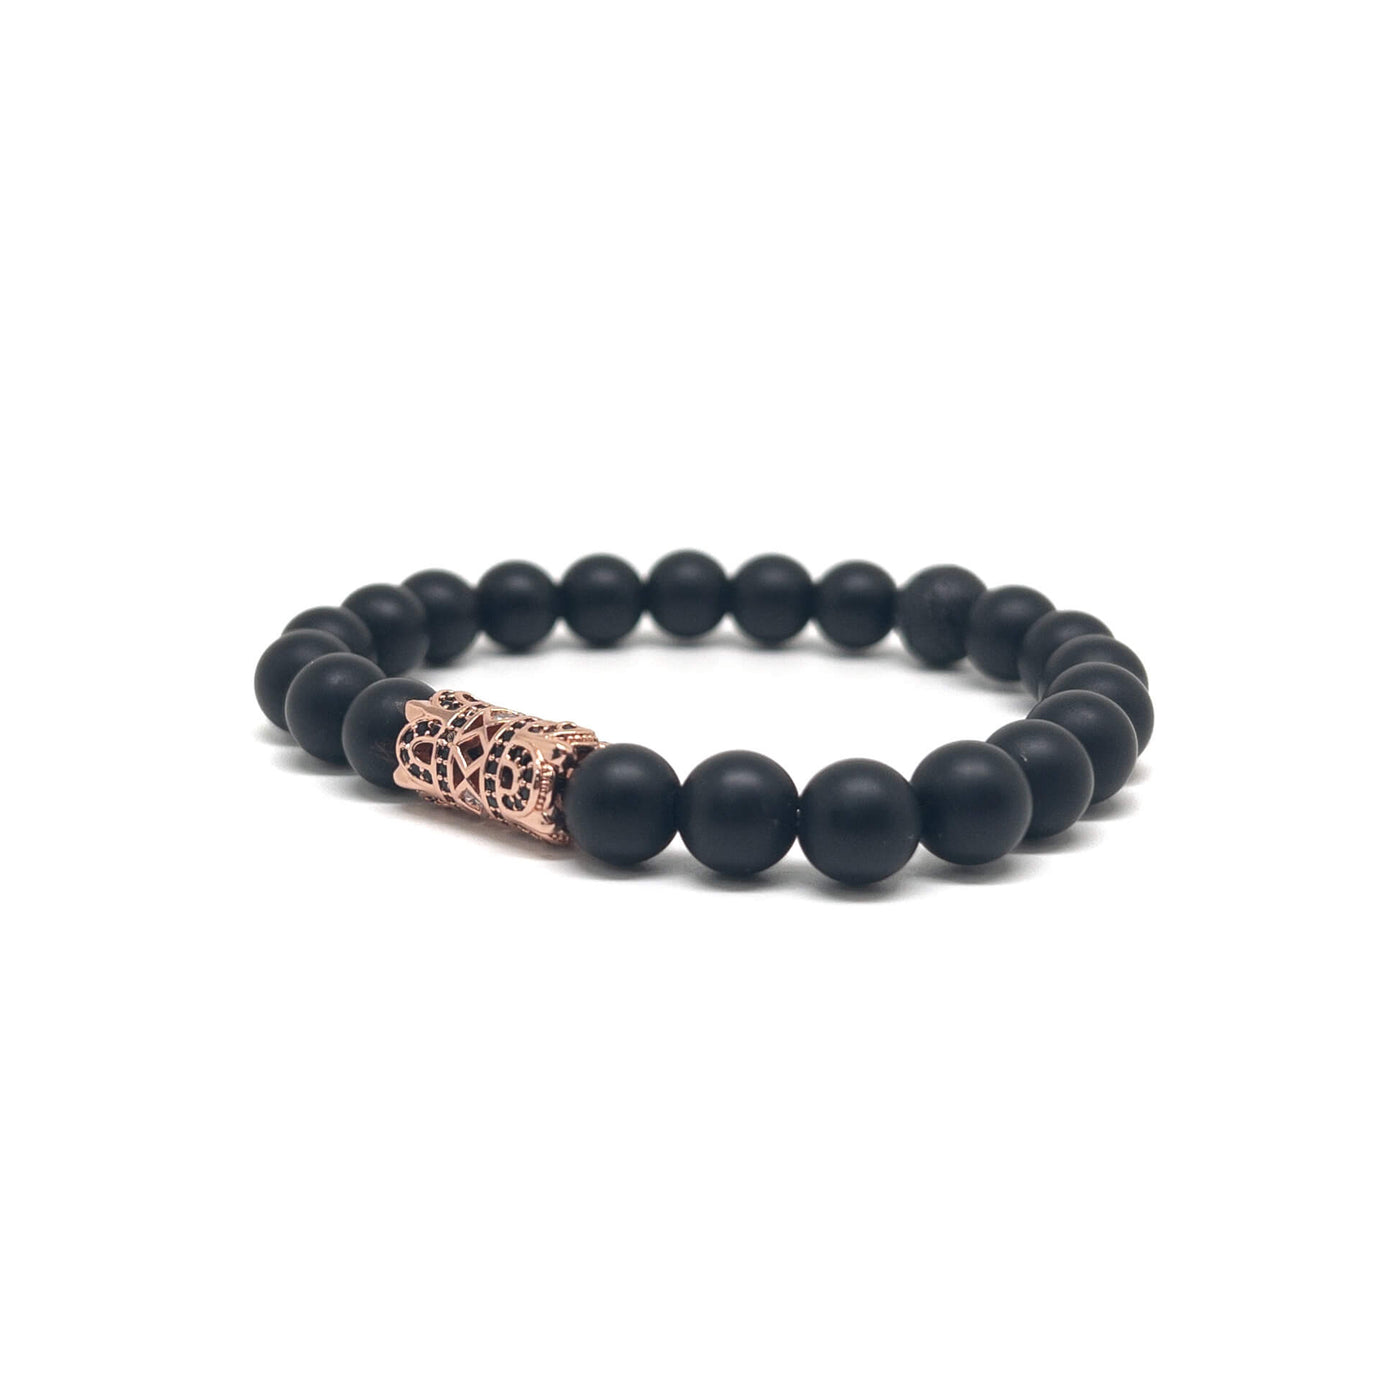 The Rose Gold Plated Hollow and Onyx Stones bracelet